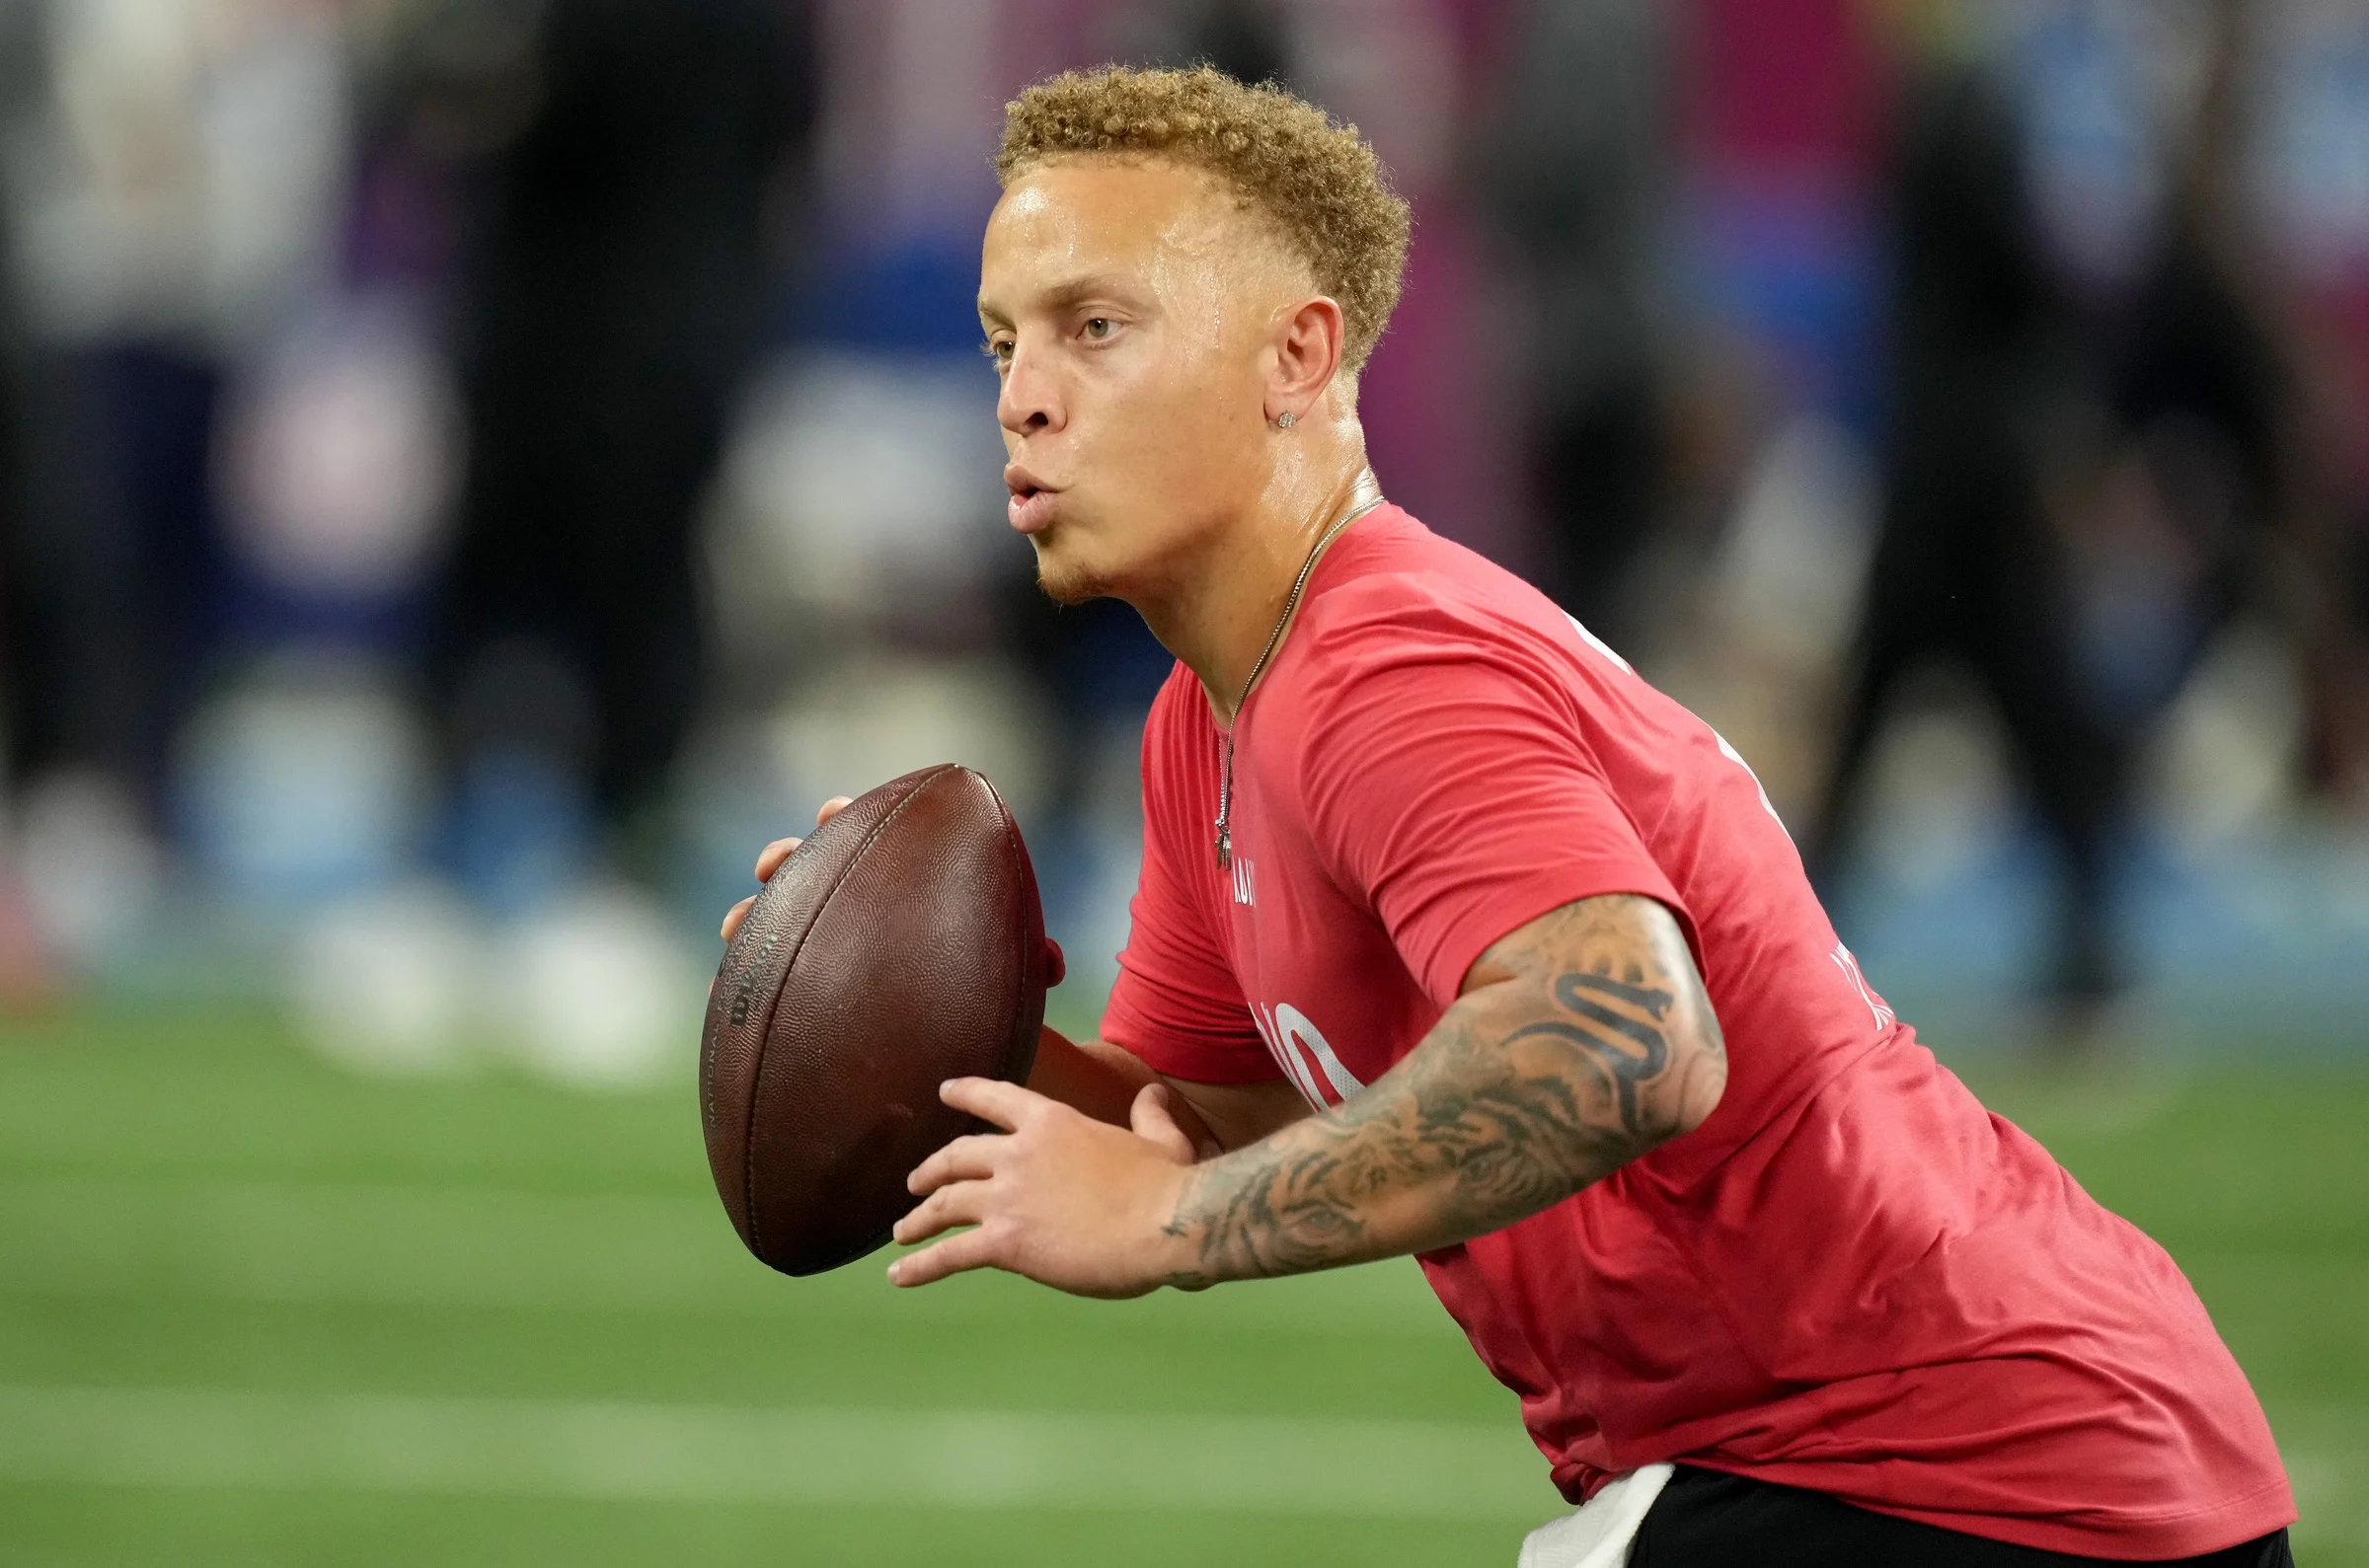 The New Orleans Saints Struck Gold with Spencer Rattler's NFL Draft Fall